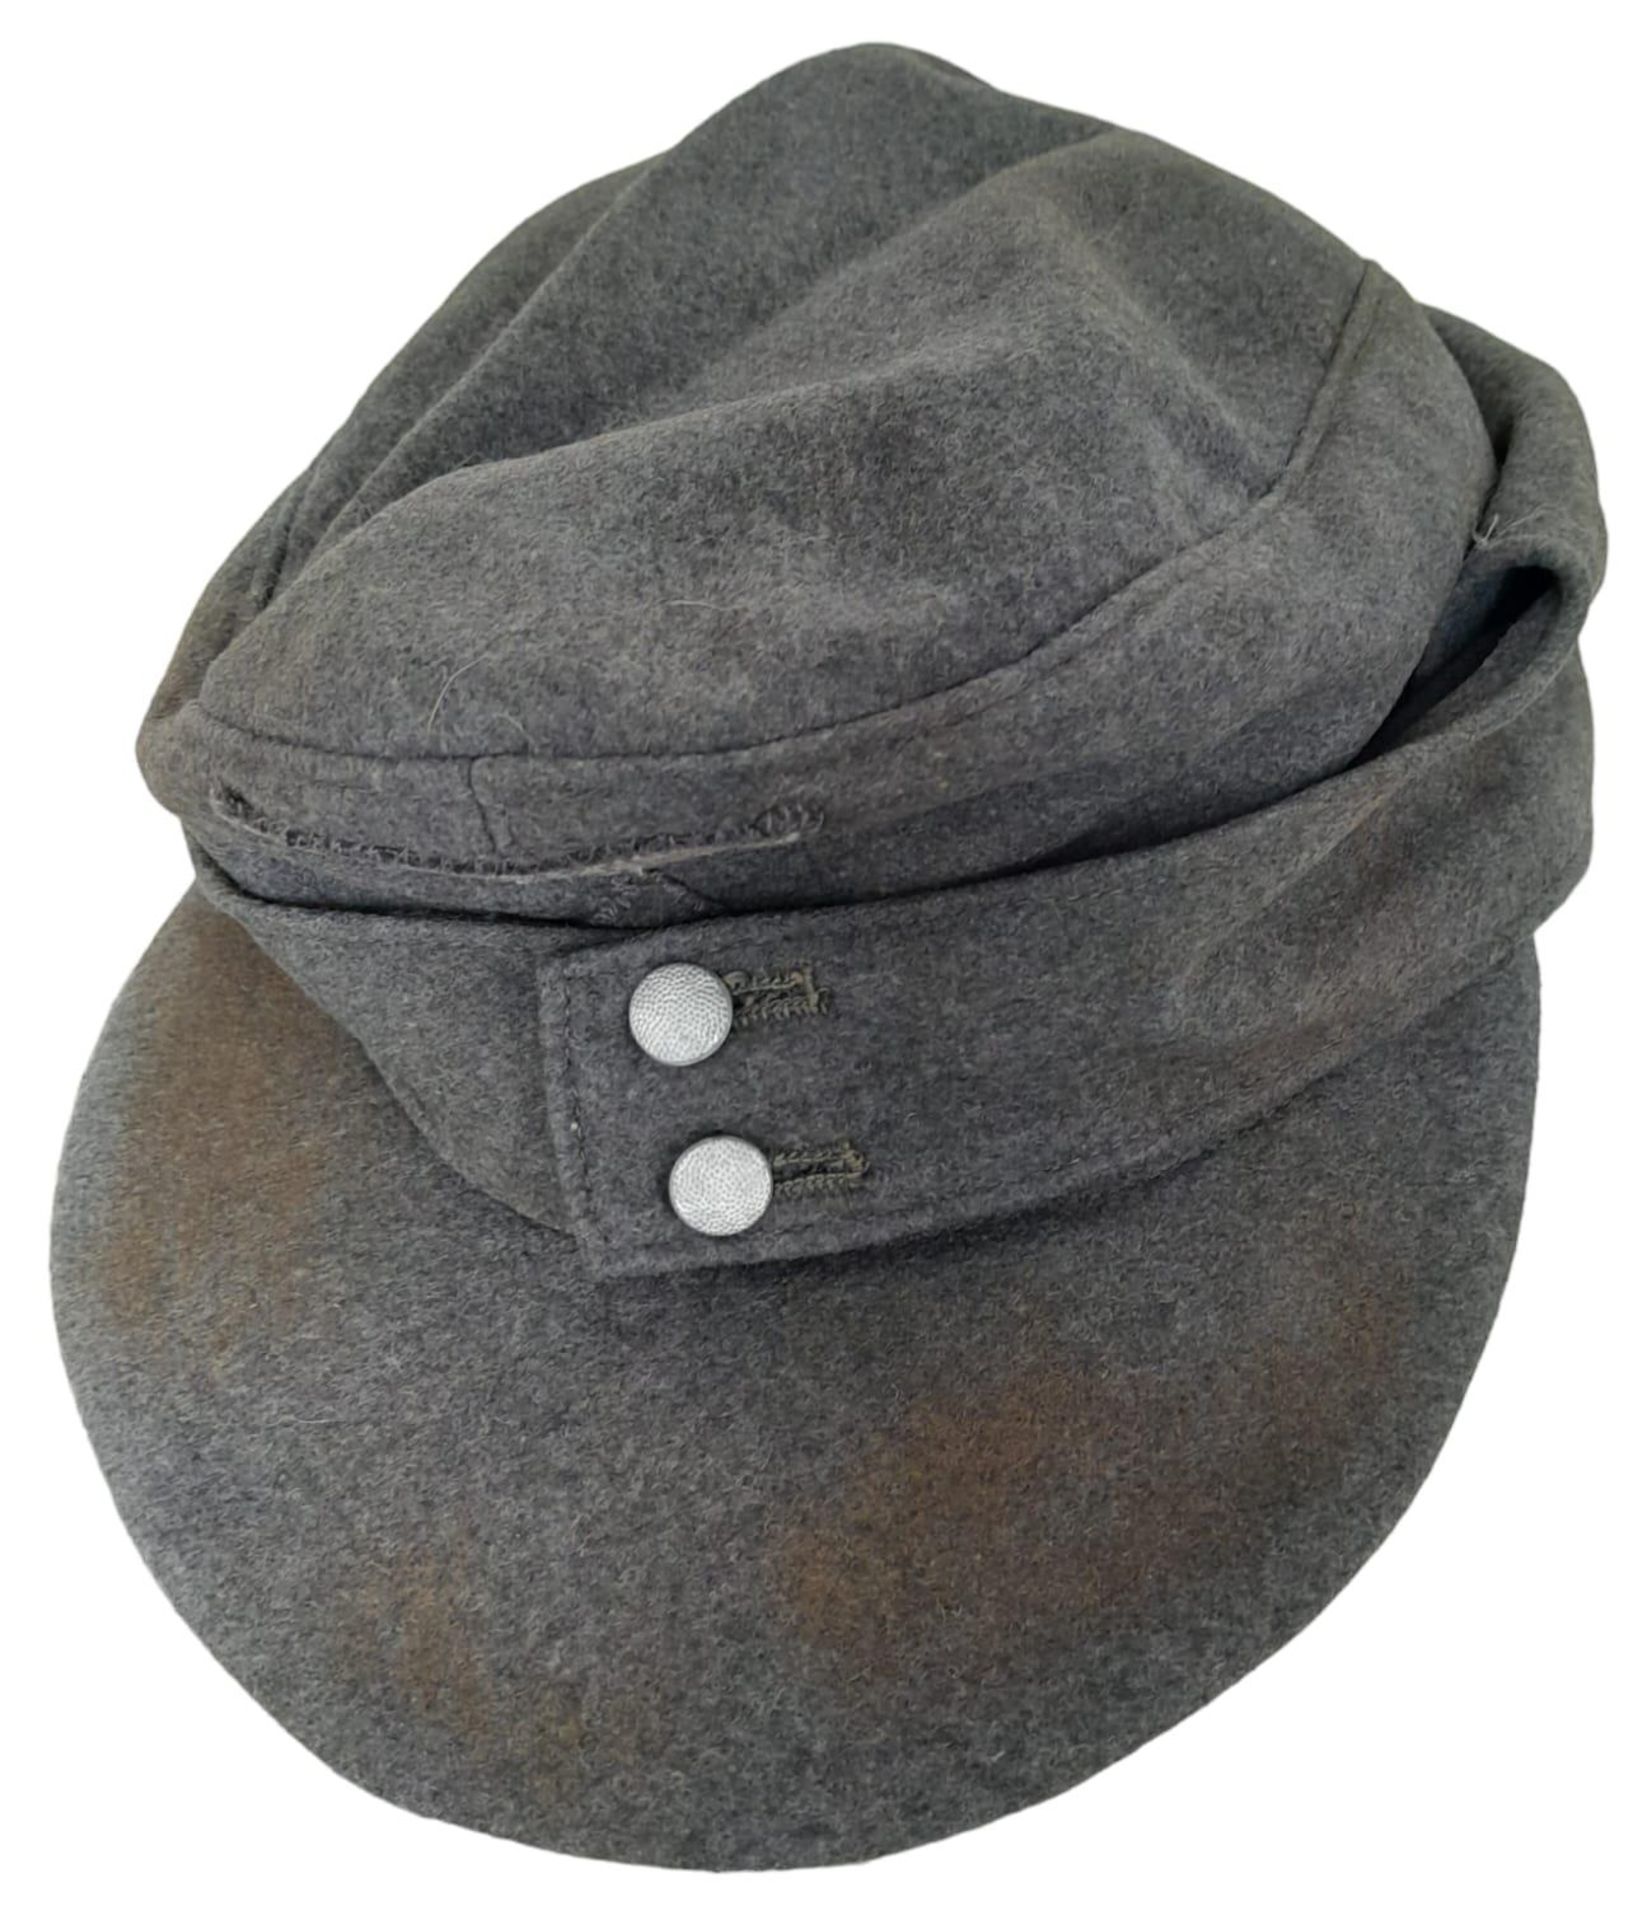 WW2 German Luftwaffe Enlisted Mans/Nco’s Private Purchase M43 Cap. - Image 4 of 11